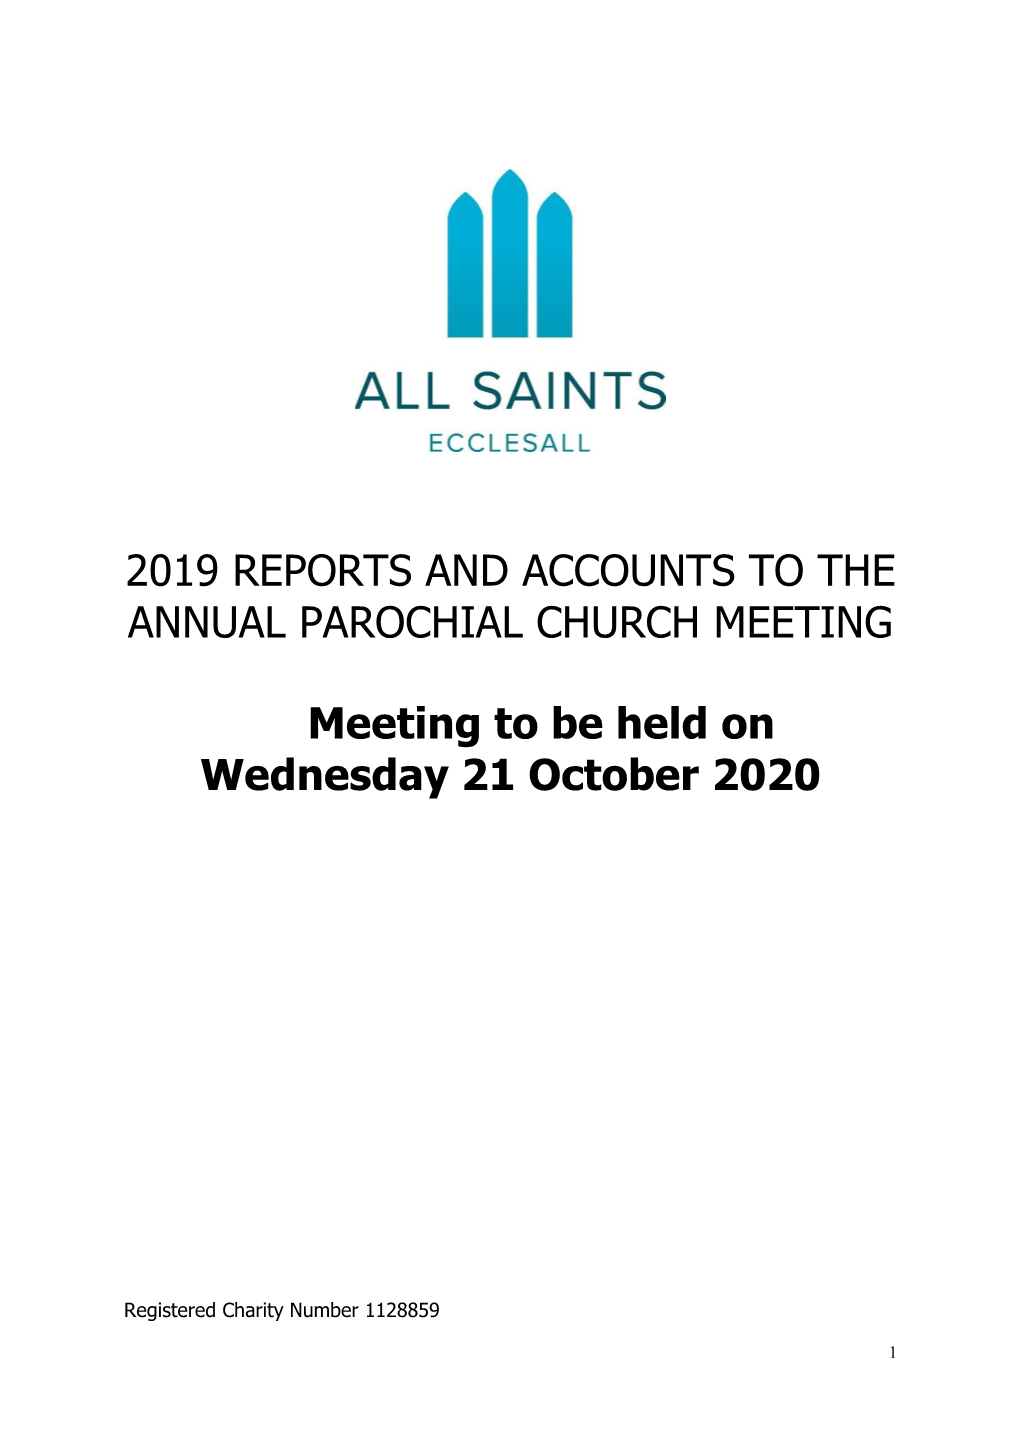 2019 Reports and Accounts to the Annual Parochial Church Meeting